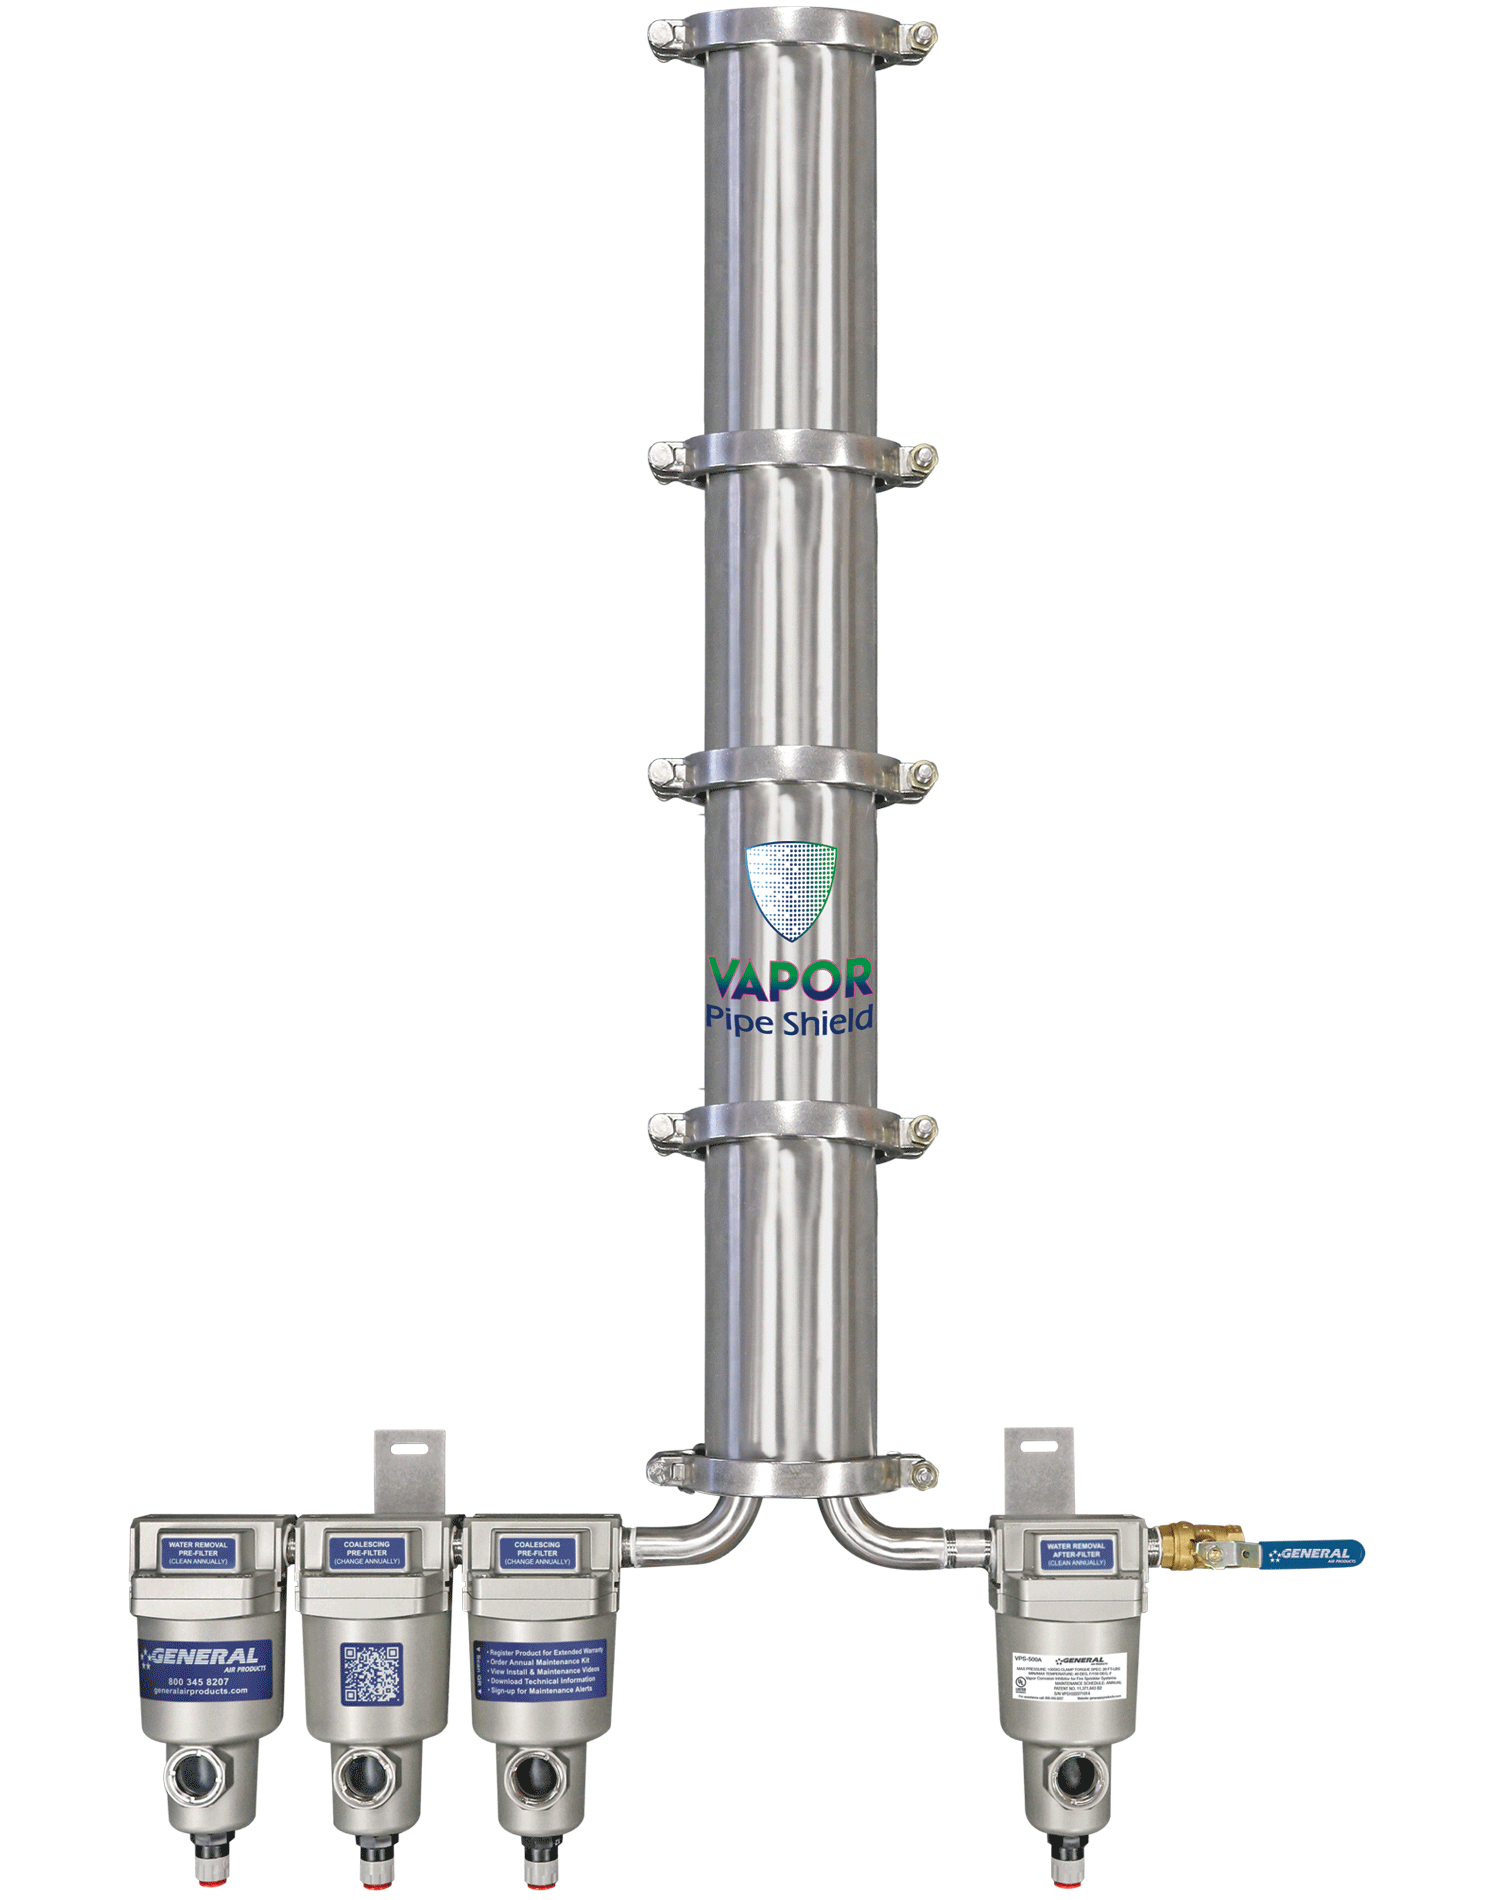 Vapor Pipe Shield - VPS-2000A. Corrosion prevention in dry and pre-action fire sprinkler systems.